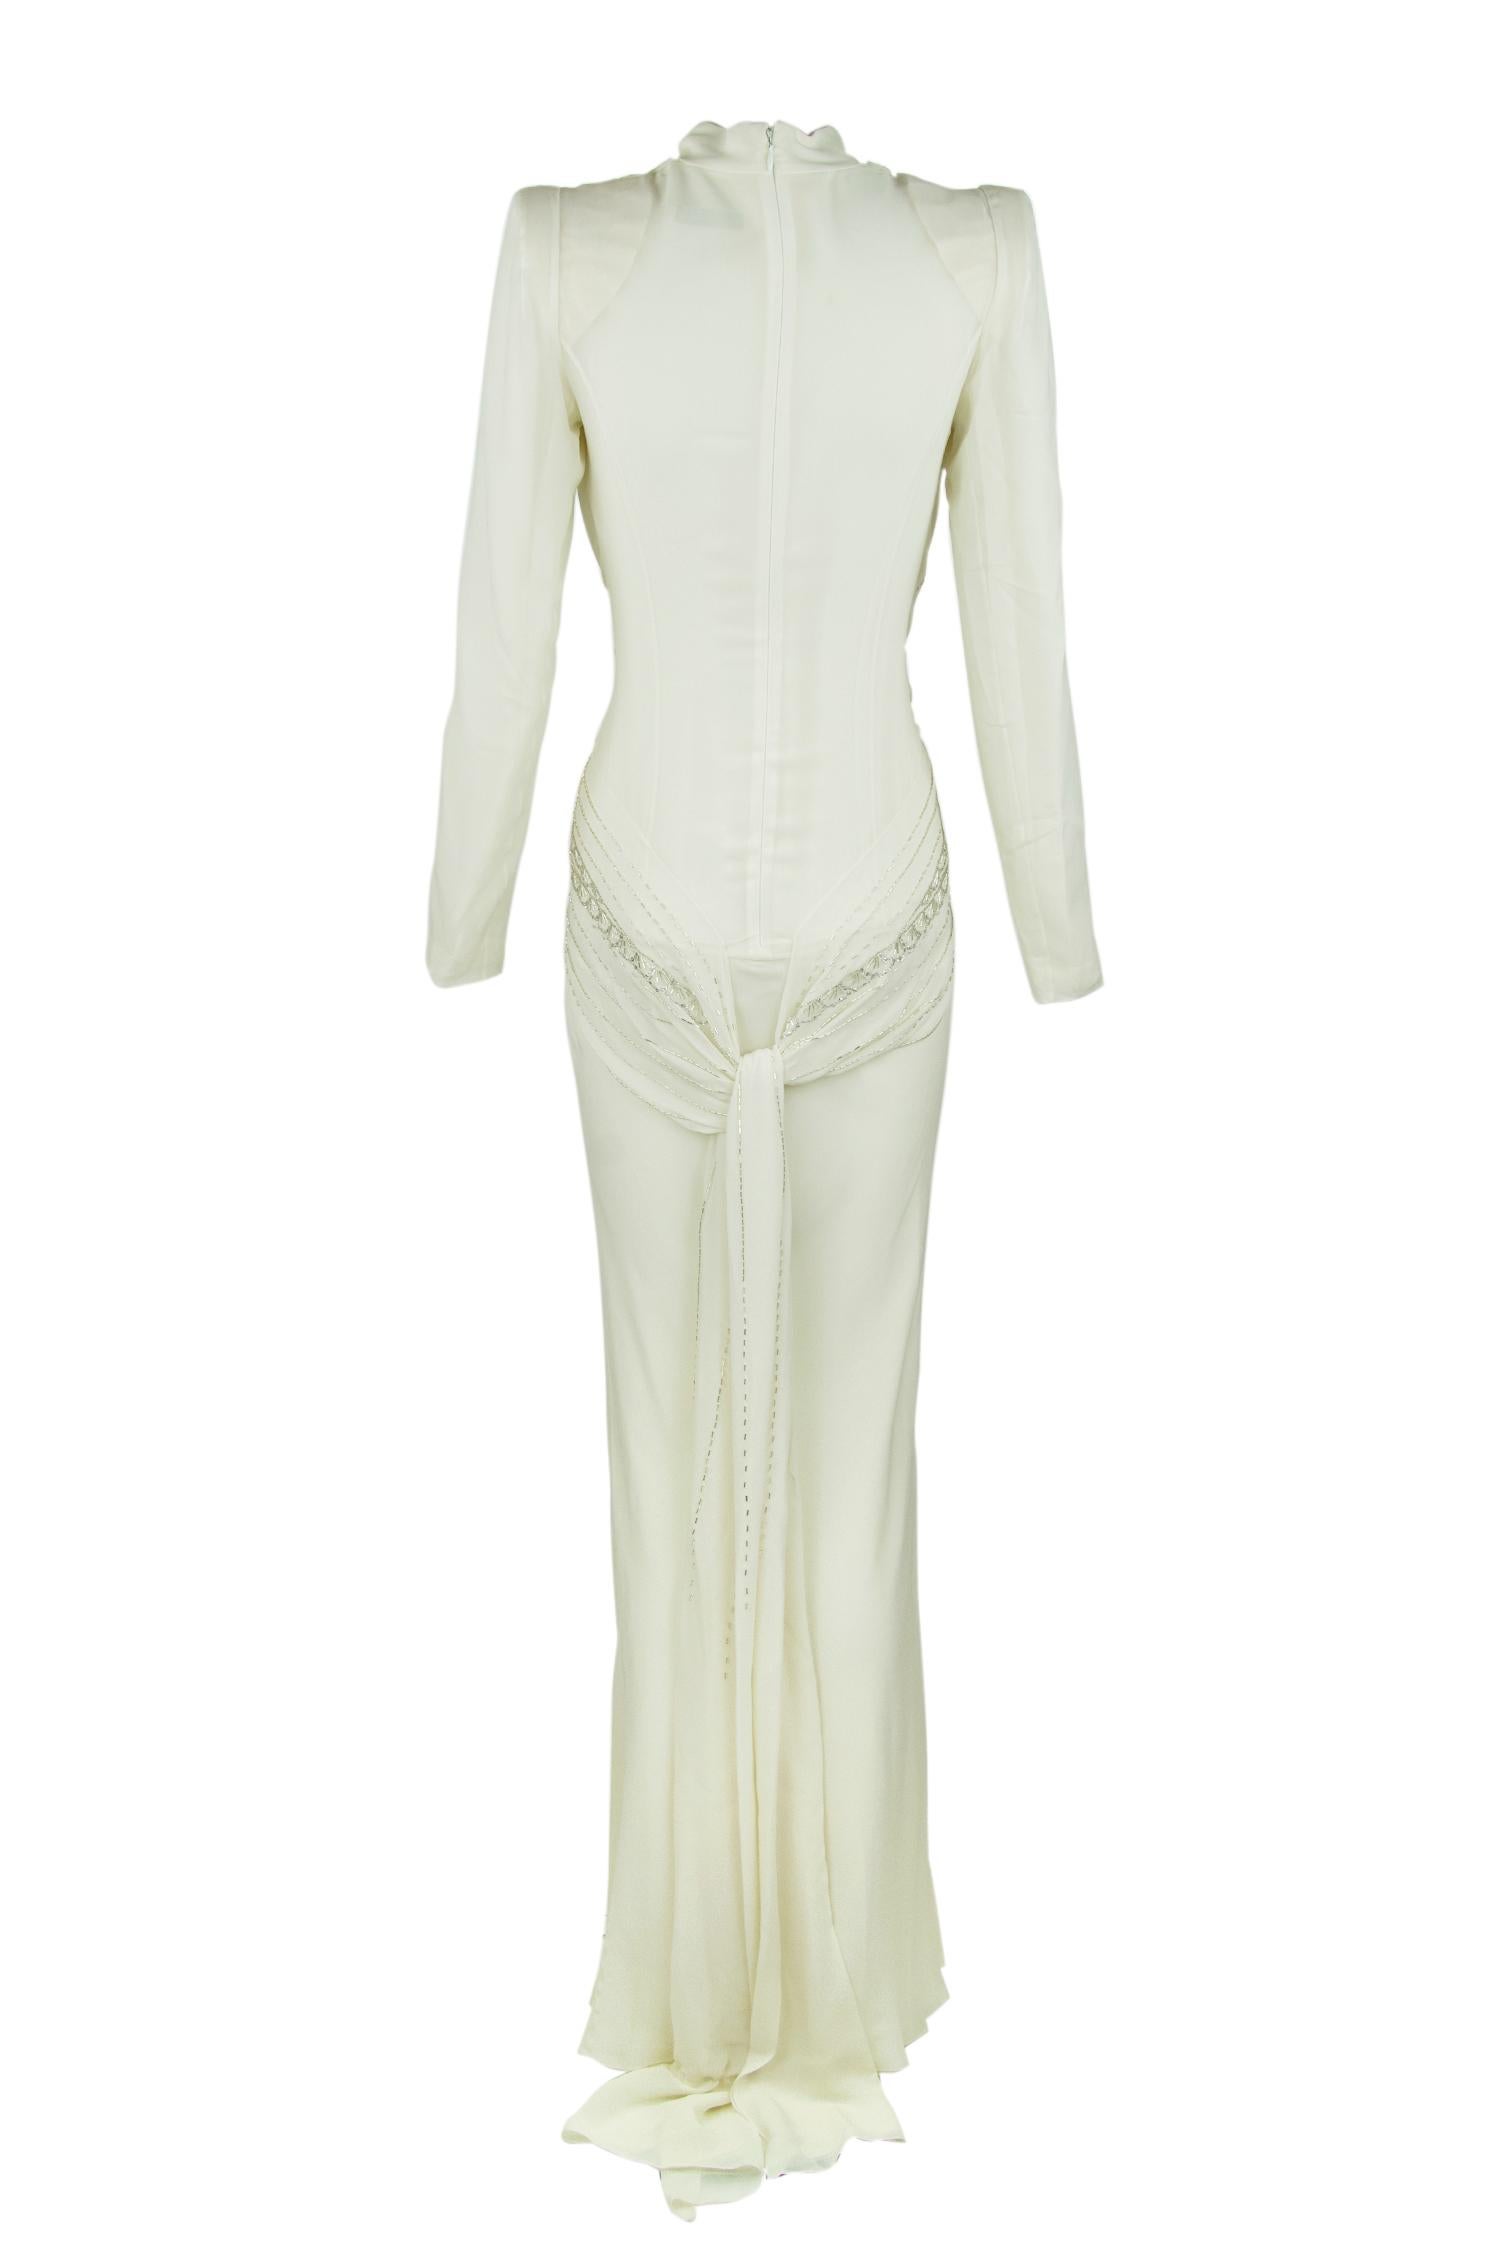 Incredible white silk vintage Dior gown that embodies everything about the House of Dior.  Shoulder pads give this gown a vintage feel with an incredibly low, sexy v neck.  The bodice is embroidered in silver beading.  This is a rare find.

Size: